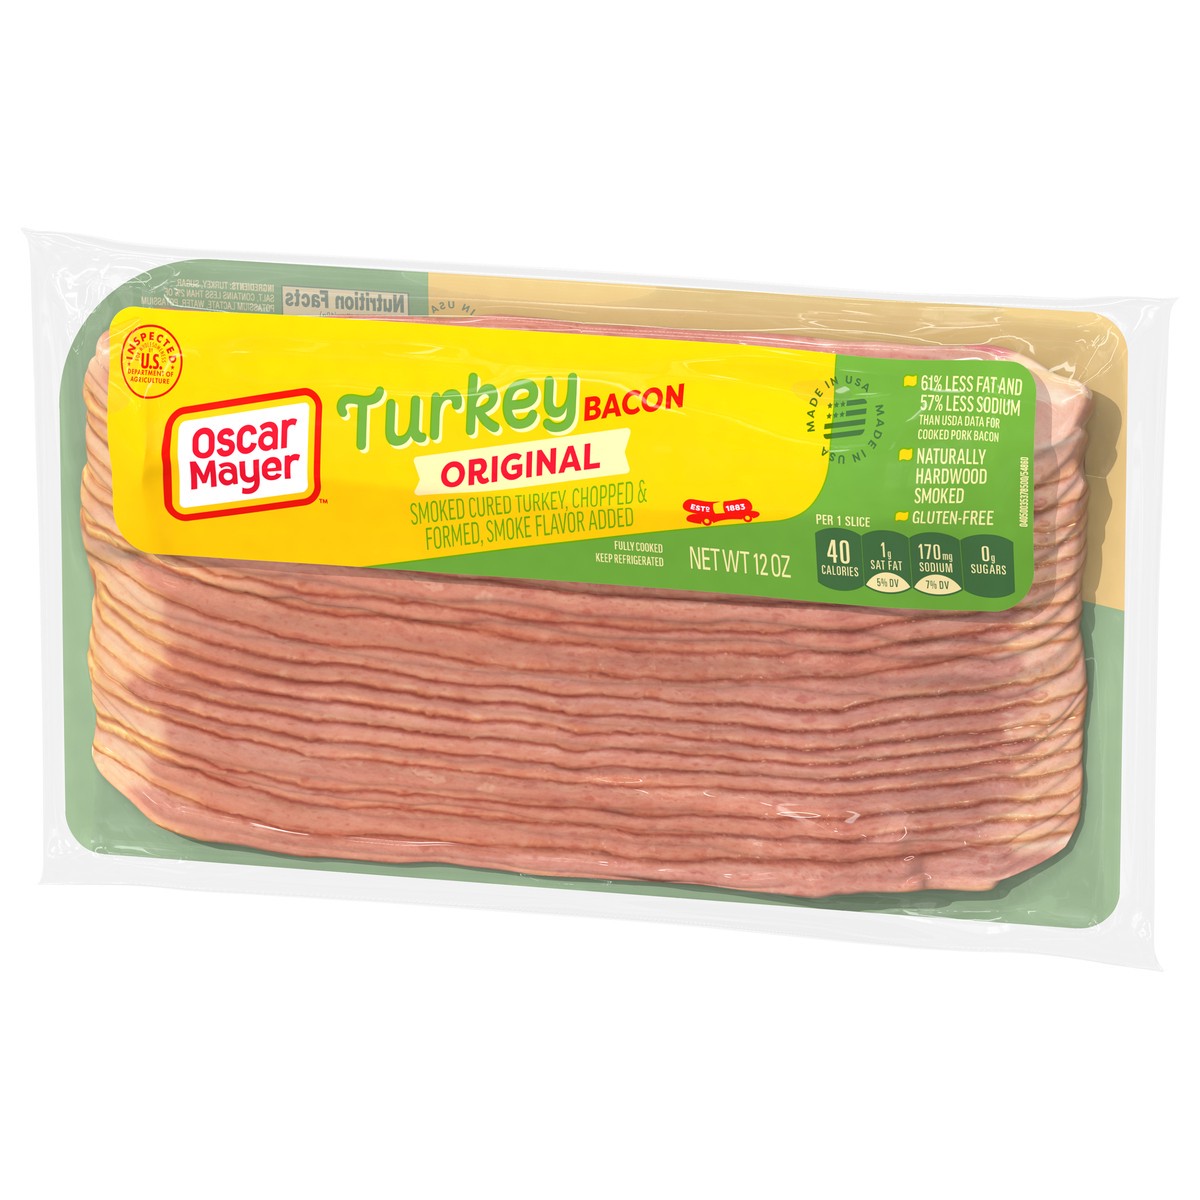 slide 8 of 9, Oscar Mayer Gluten Free Turkey Bacon with 58% Less Fat & 57% Less Sodium, 12 oz Pack, 21-23 slices, 12 oz